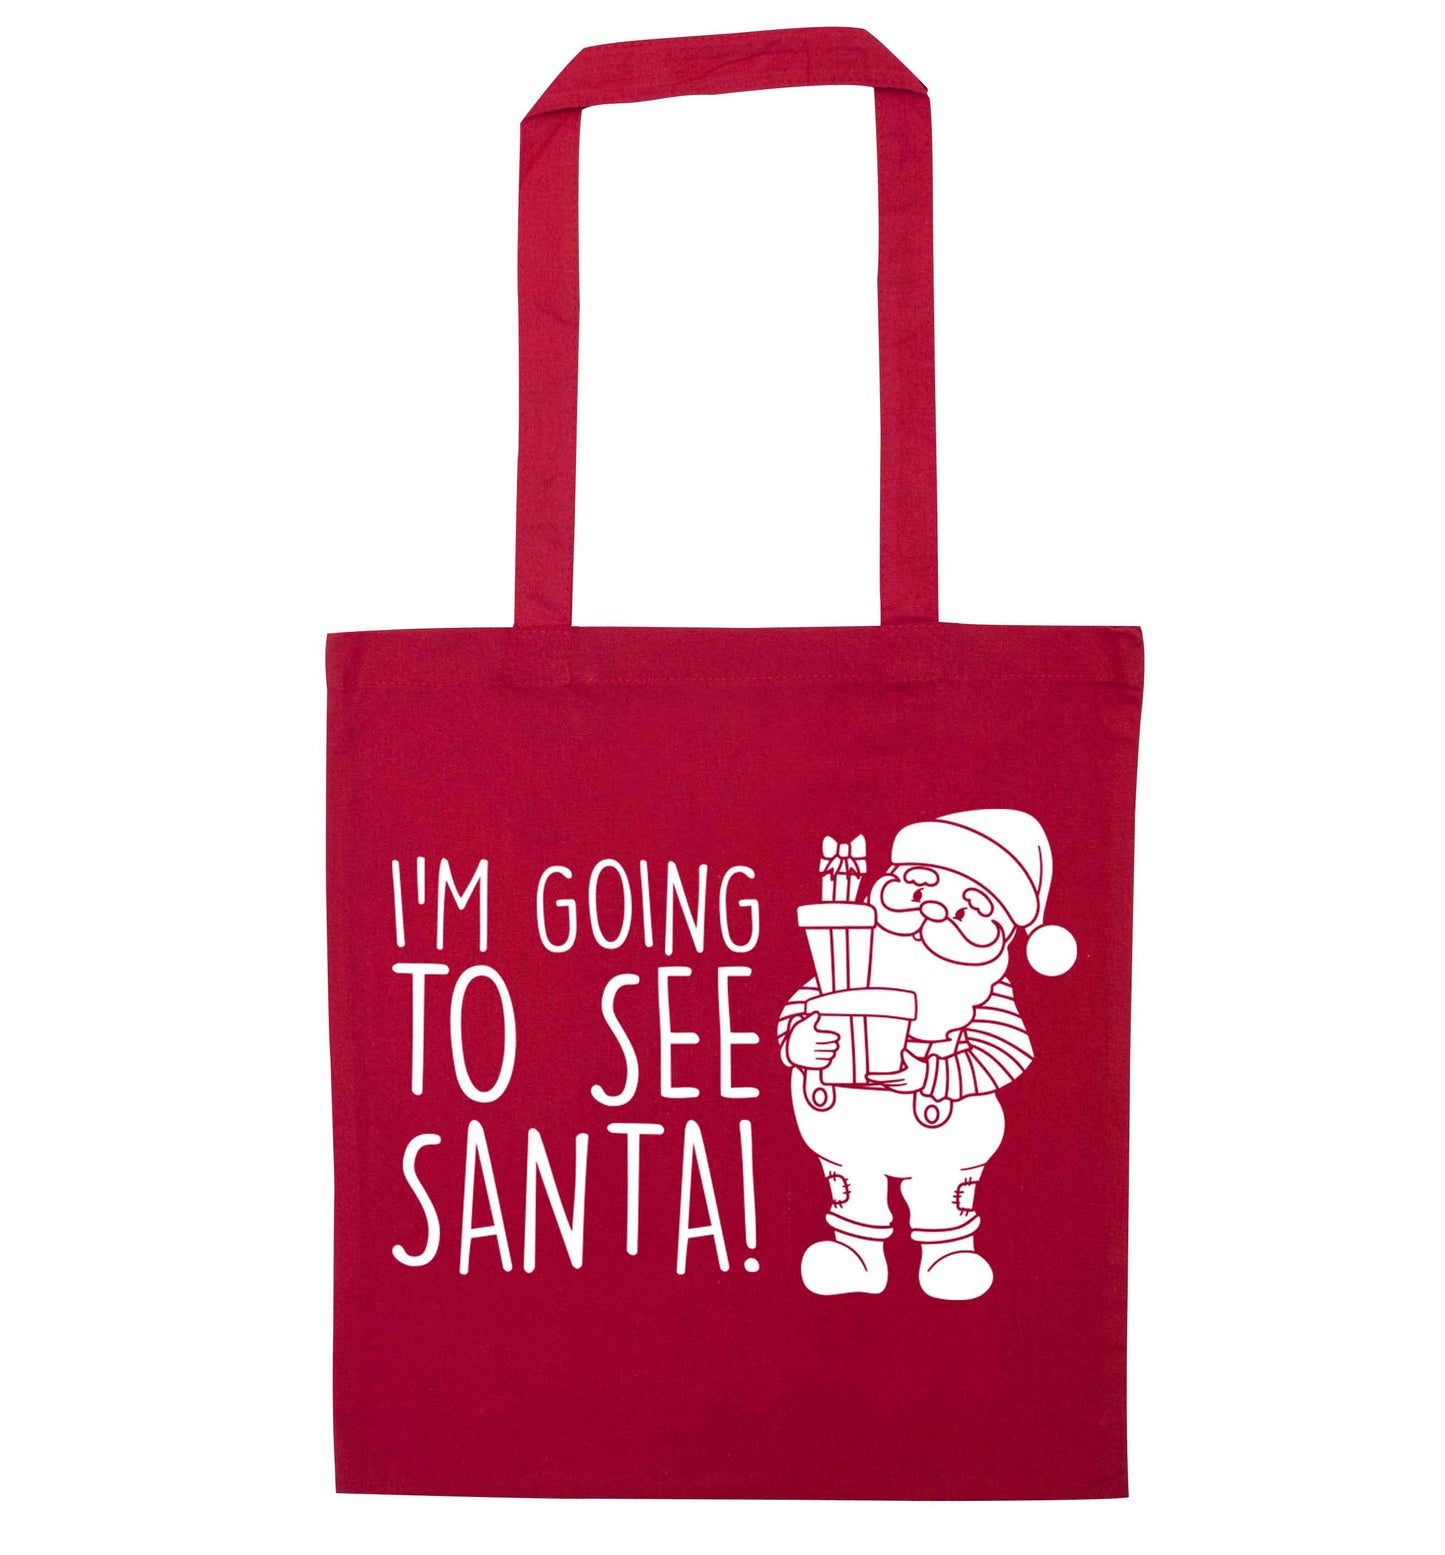 Merry Christmas red tote bag